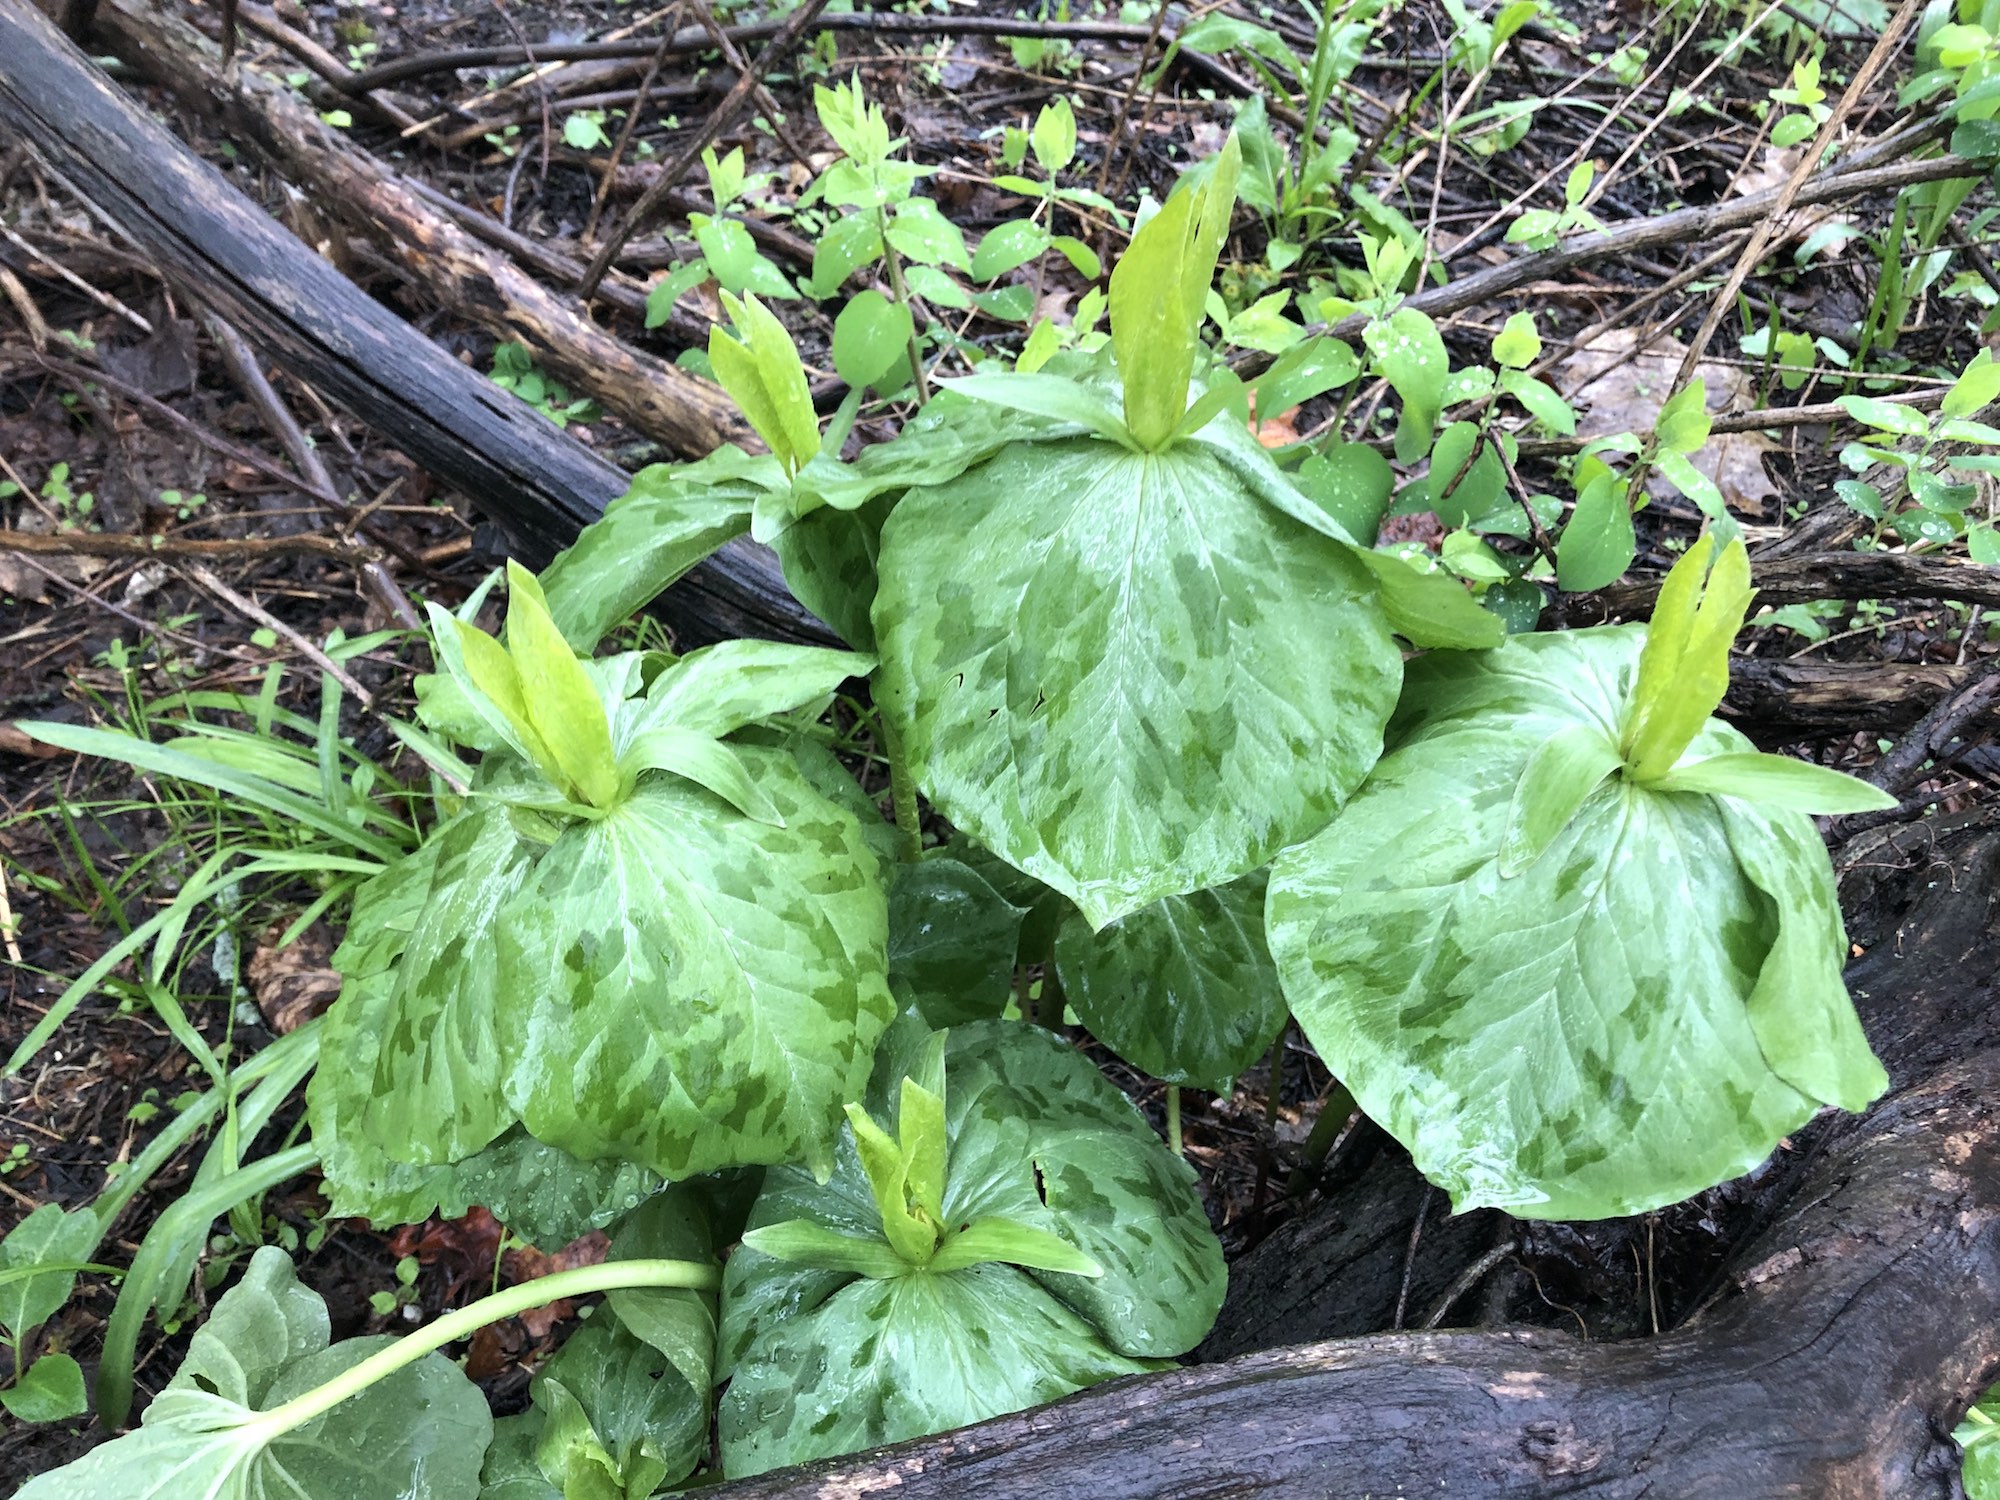 Yellow Trillium off of bike path between Marion Dunn and Duck Pond on May 6, 2019.